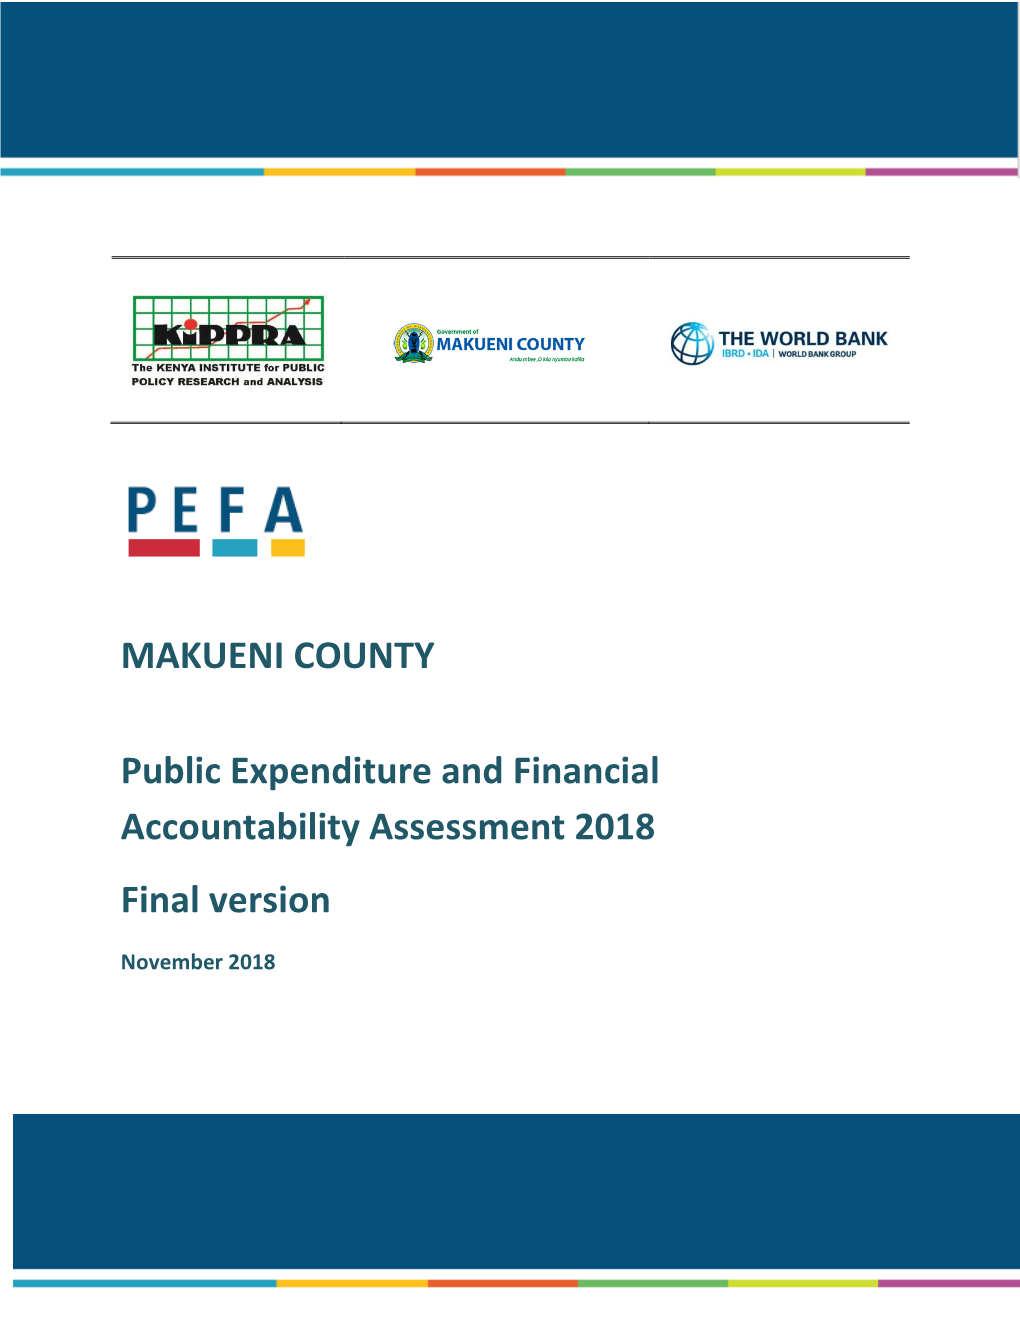 Public Expenditure and Financial Accountability Assessment 2018 Final Version